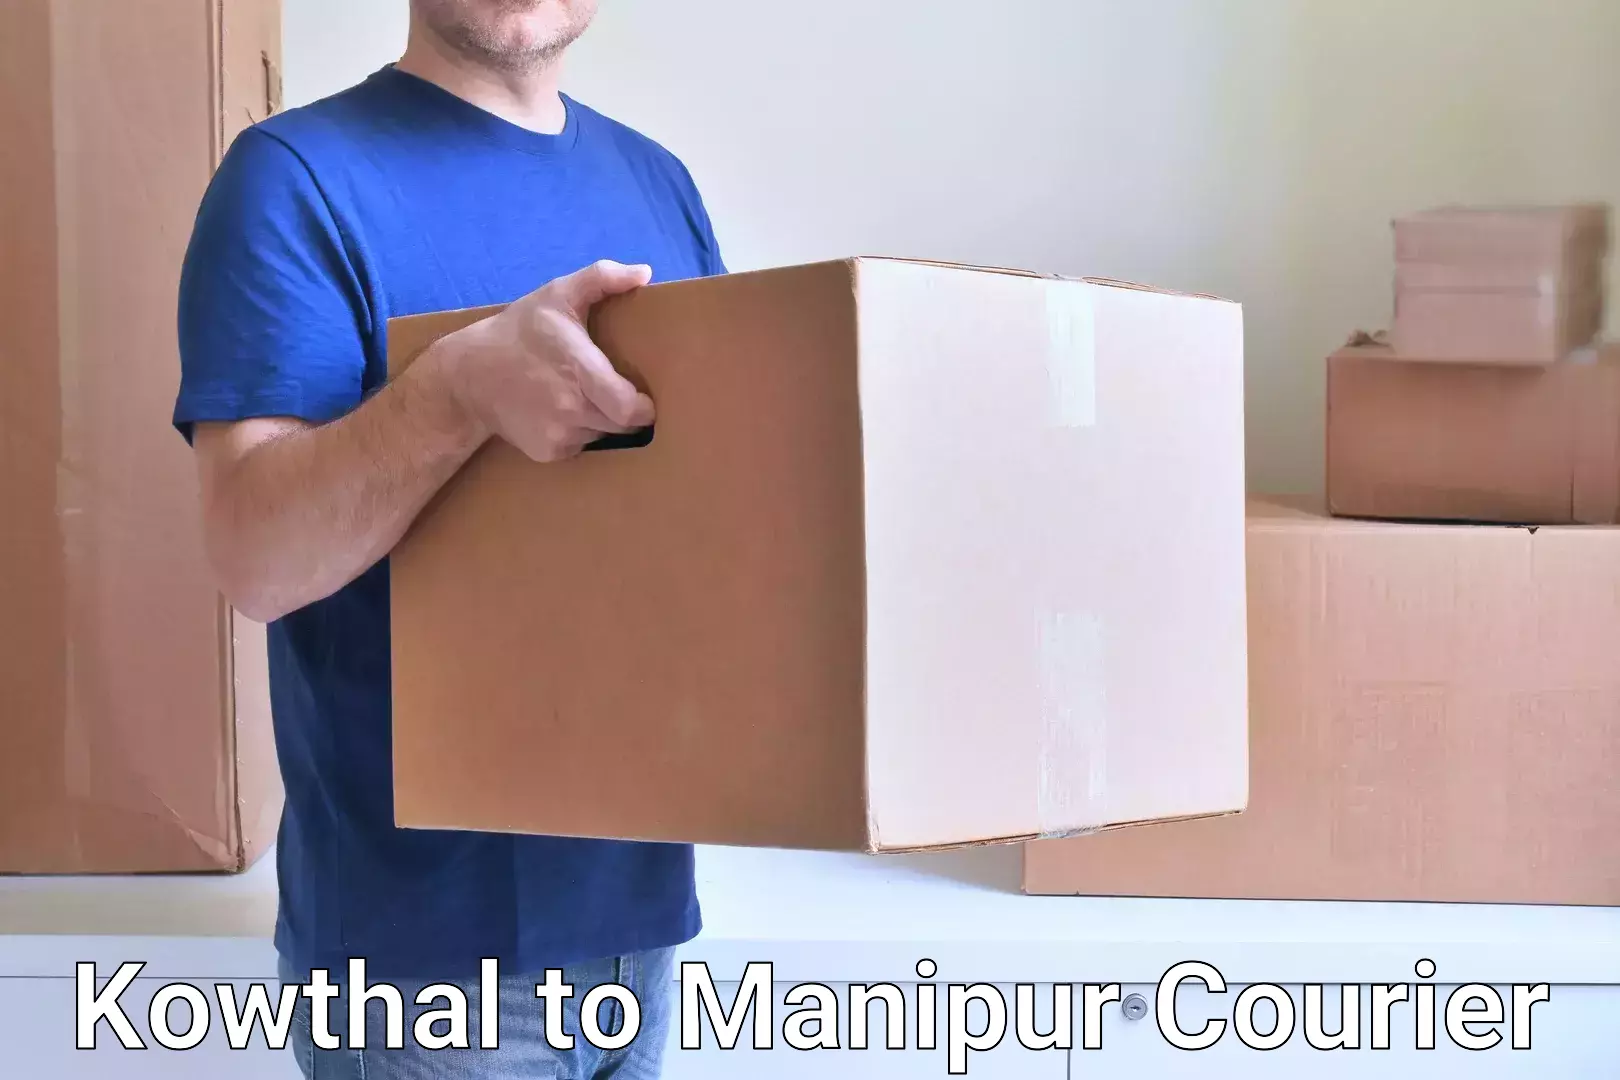 Efficient order fulfillment Kowthal to Manipur